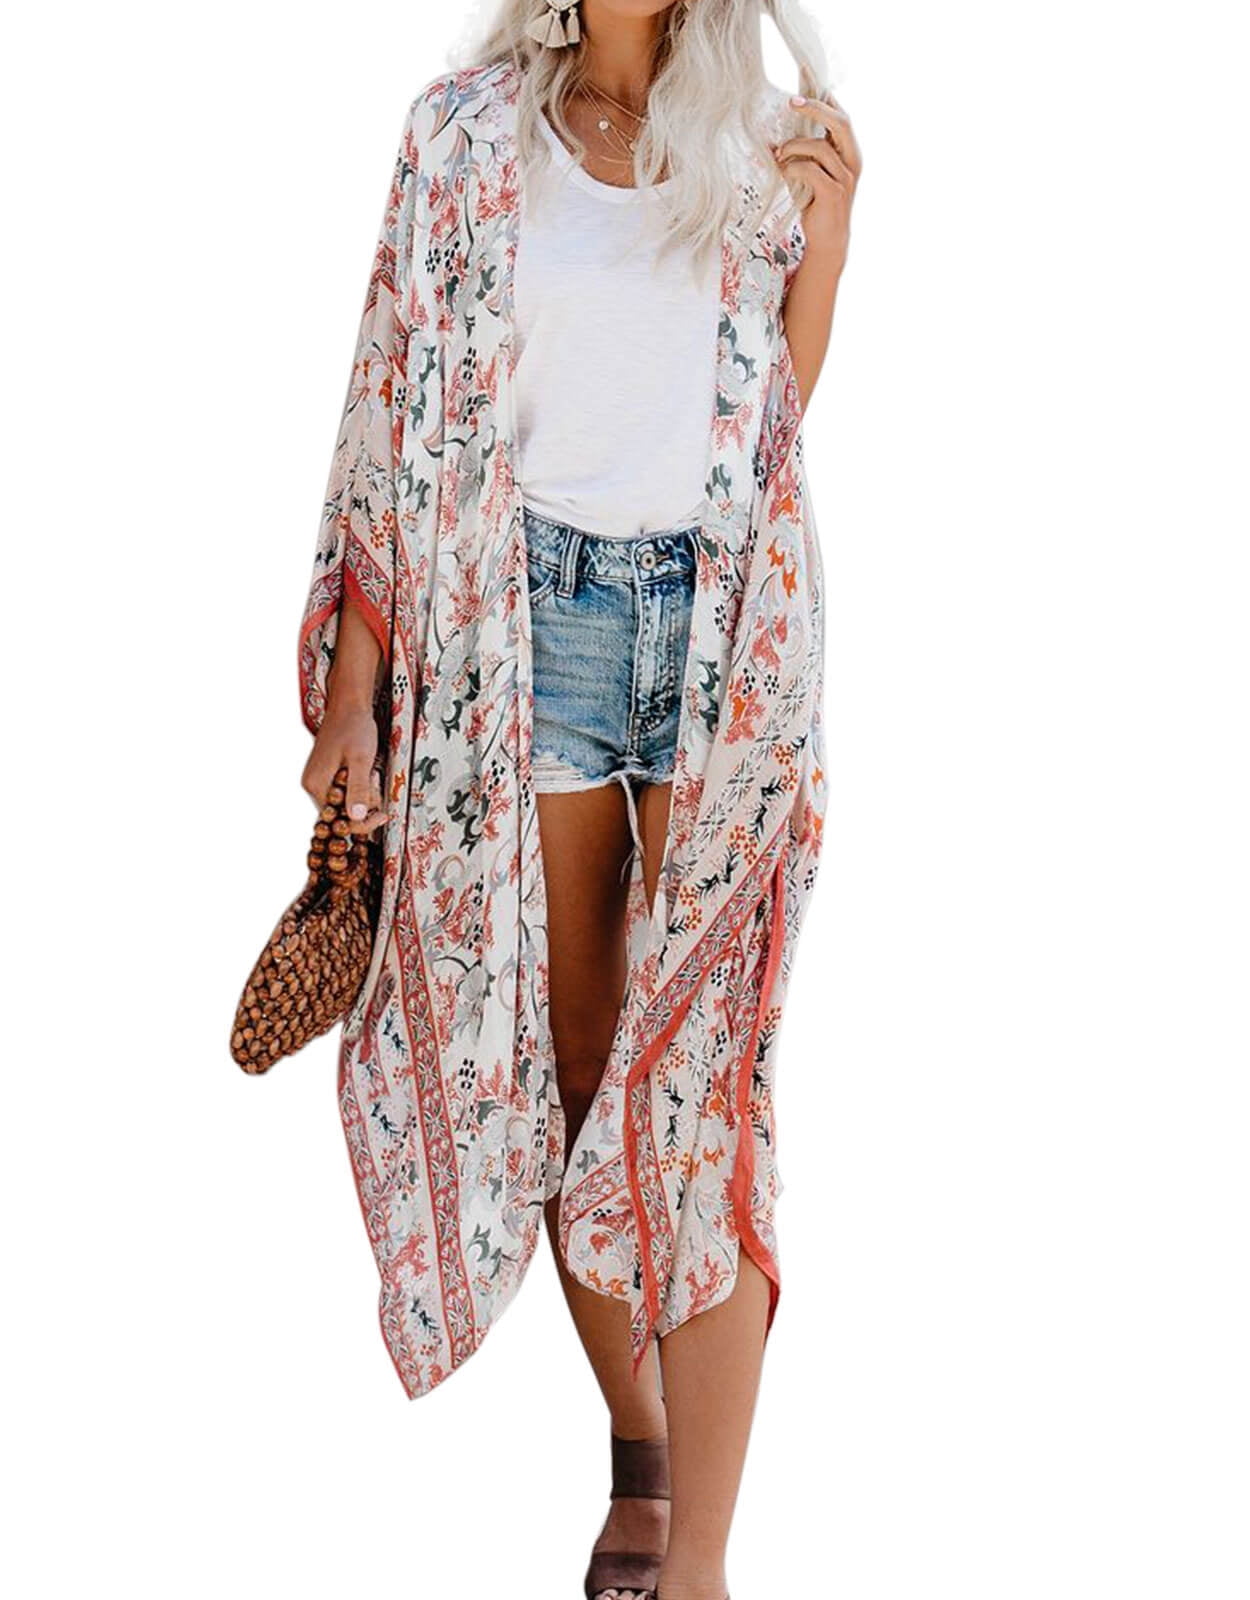 Swimsuit Coverup for Women Kimino Cardigan Floral Print Beach Coverup ...